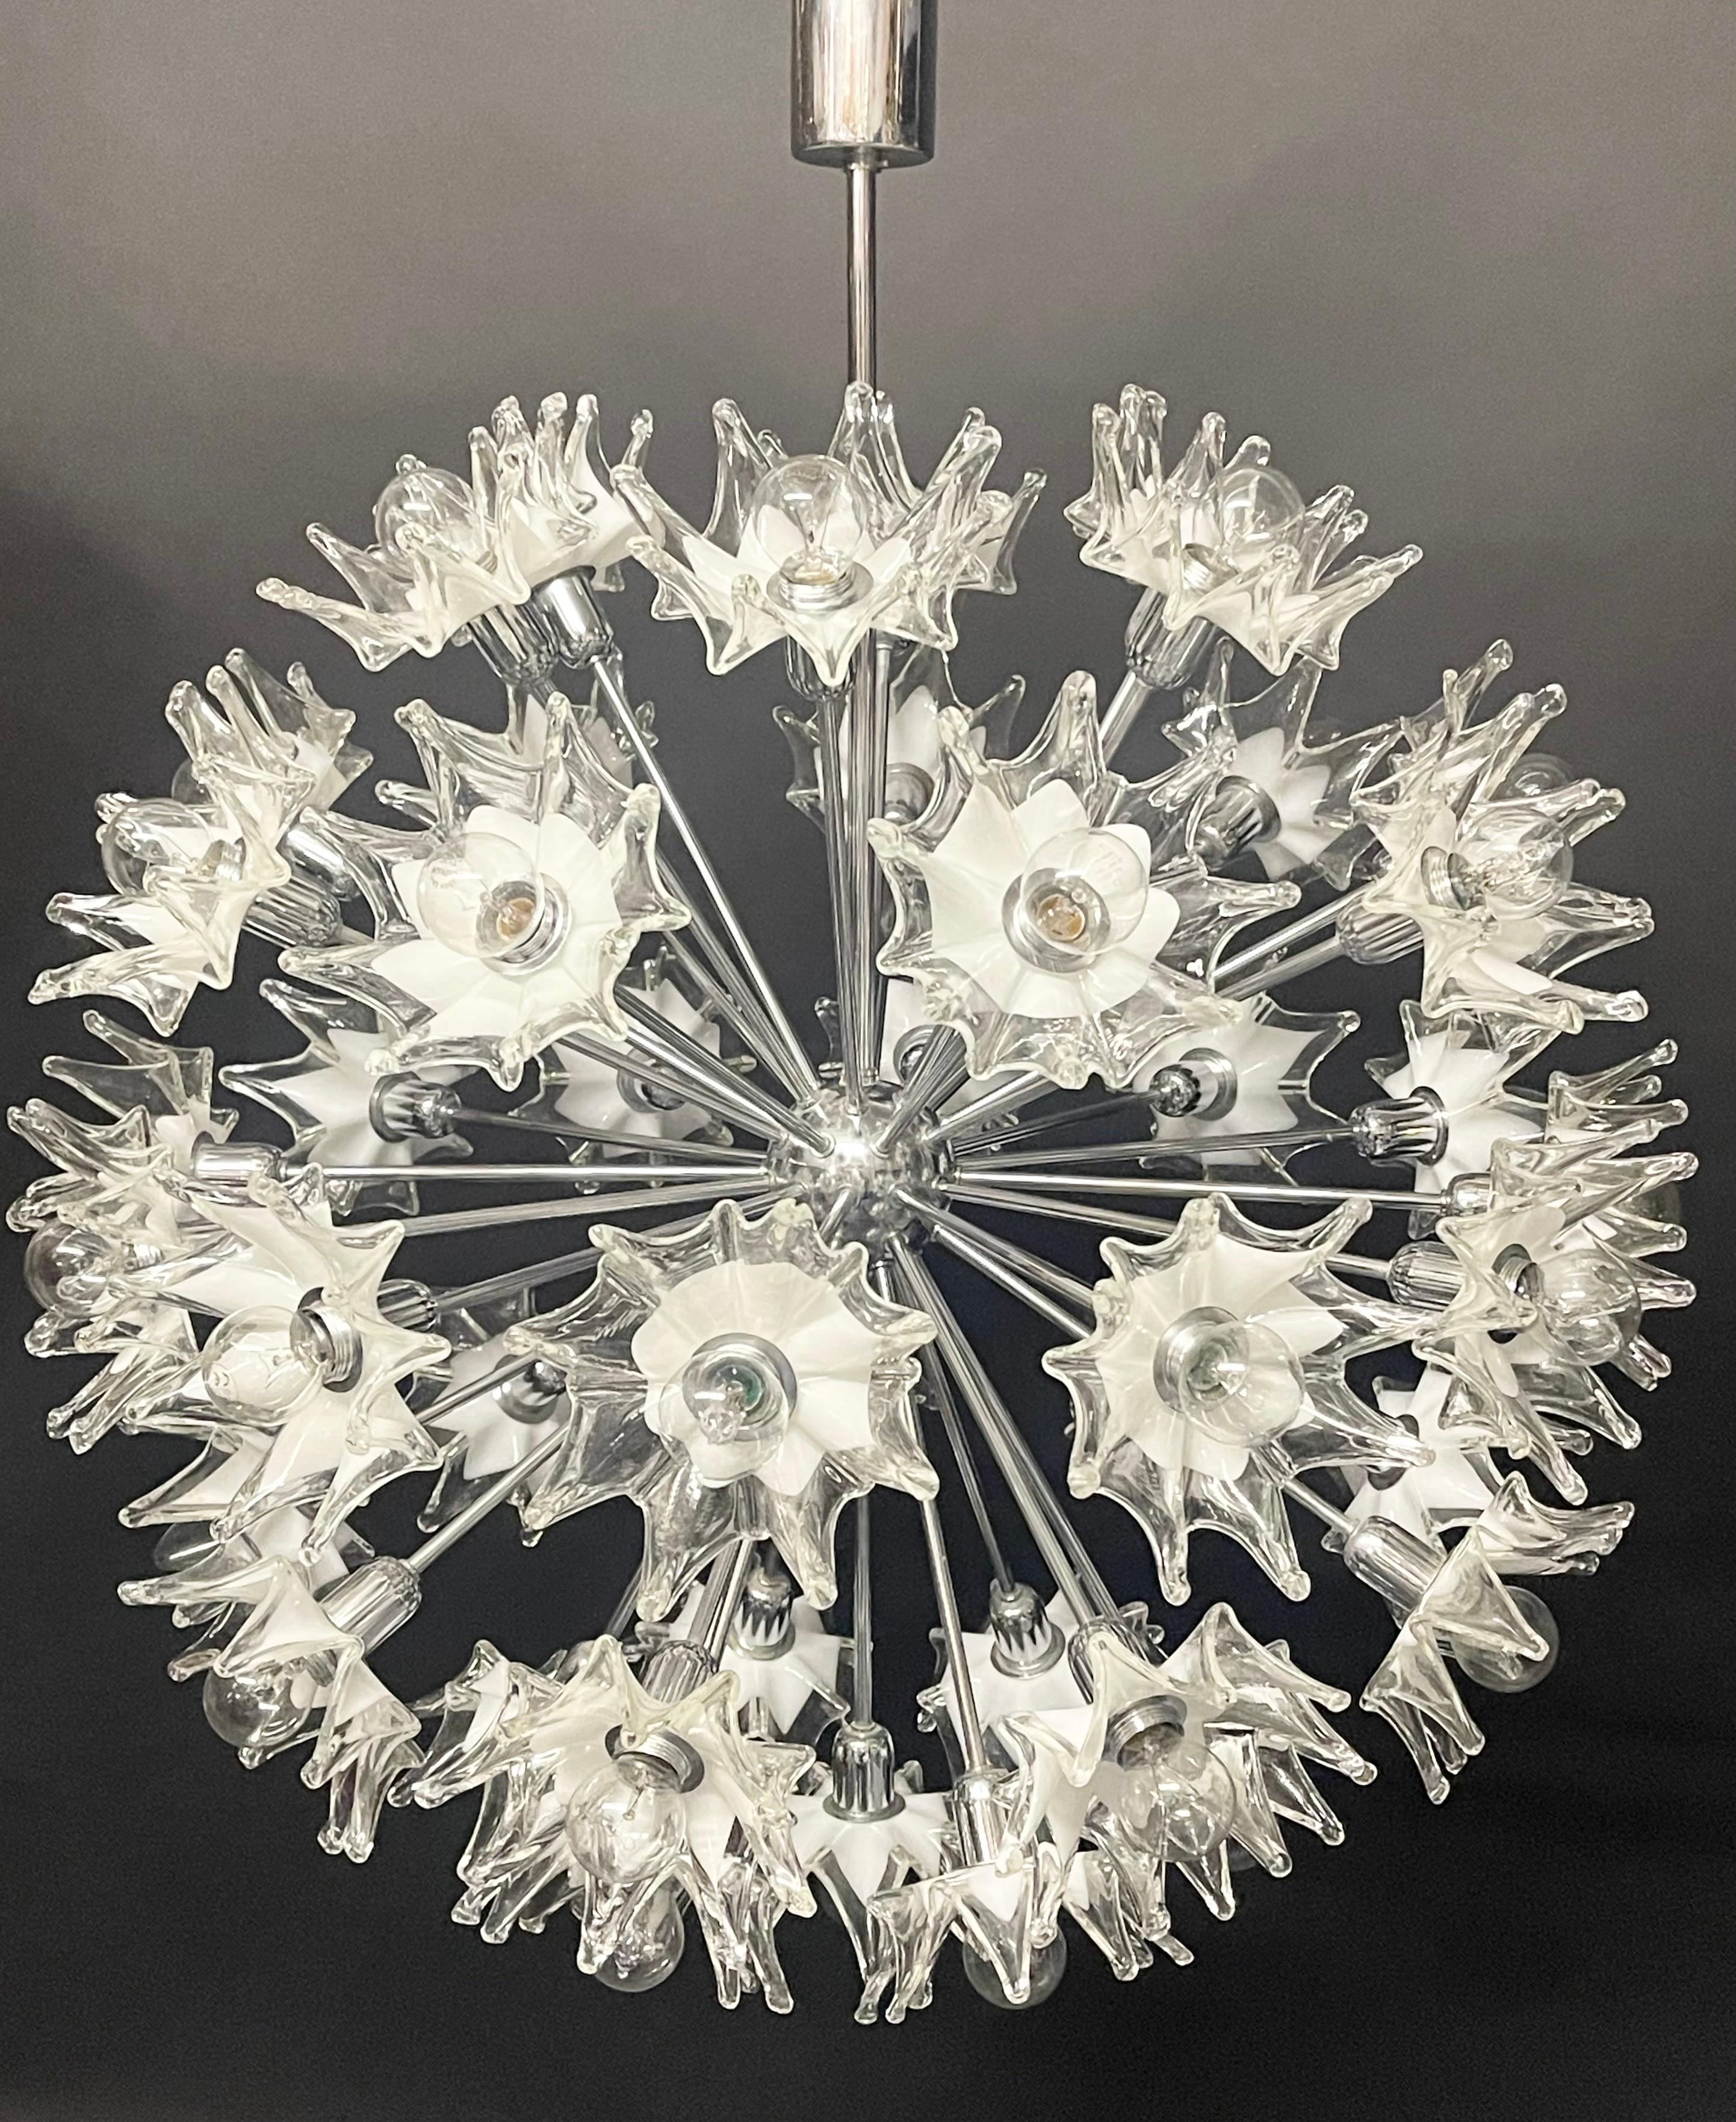 Large 43, Light Murano Spiked Glass Ball Sputnik Chandelier by Mazzega, 1960s For Sale 1